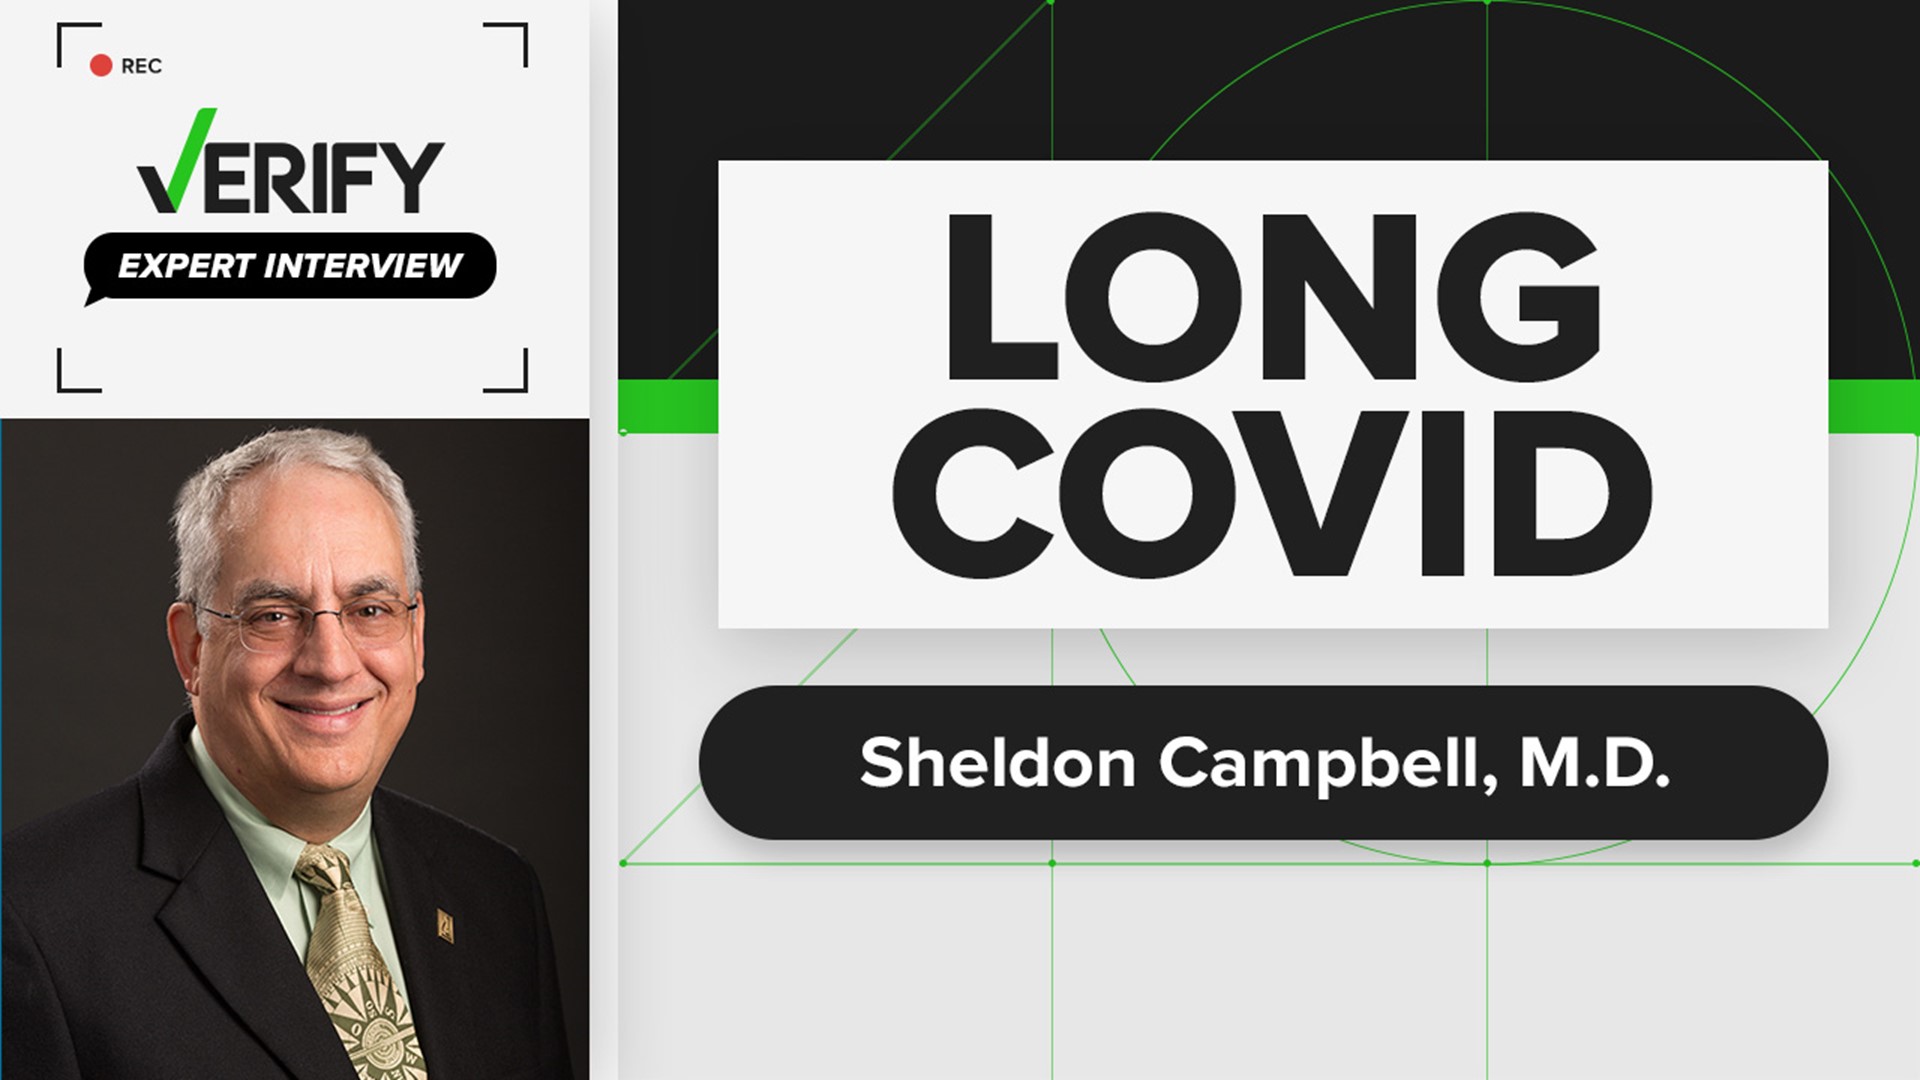 Dr. Sheldon Campbell speaks about how long COVID can affect those who have it, as well as how it can affect testing. He also shares his thoughts on monkeypox